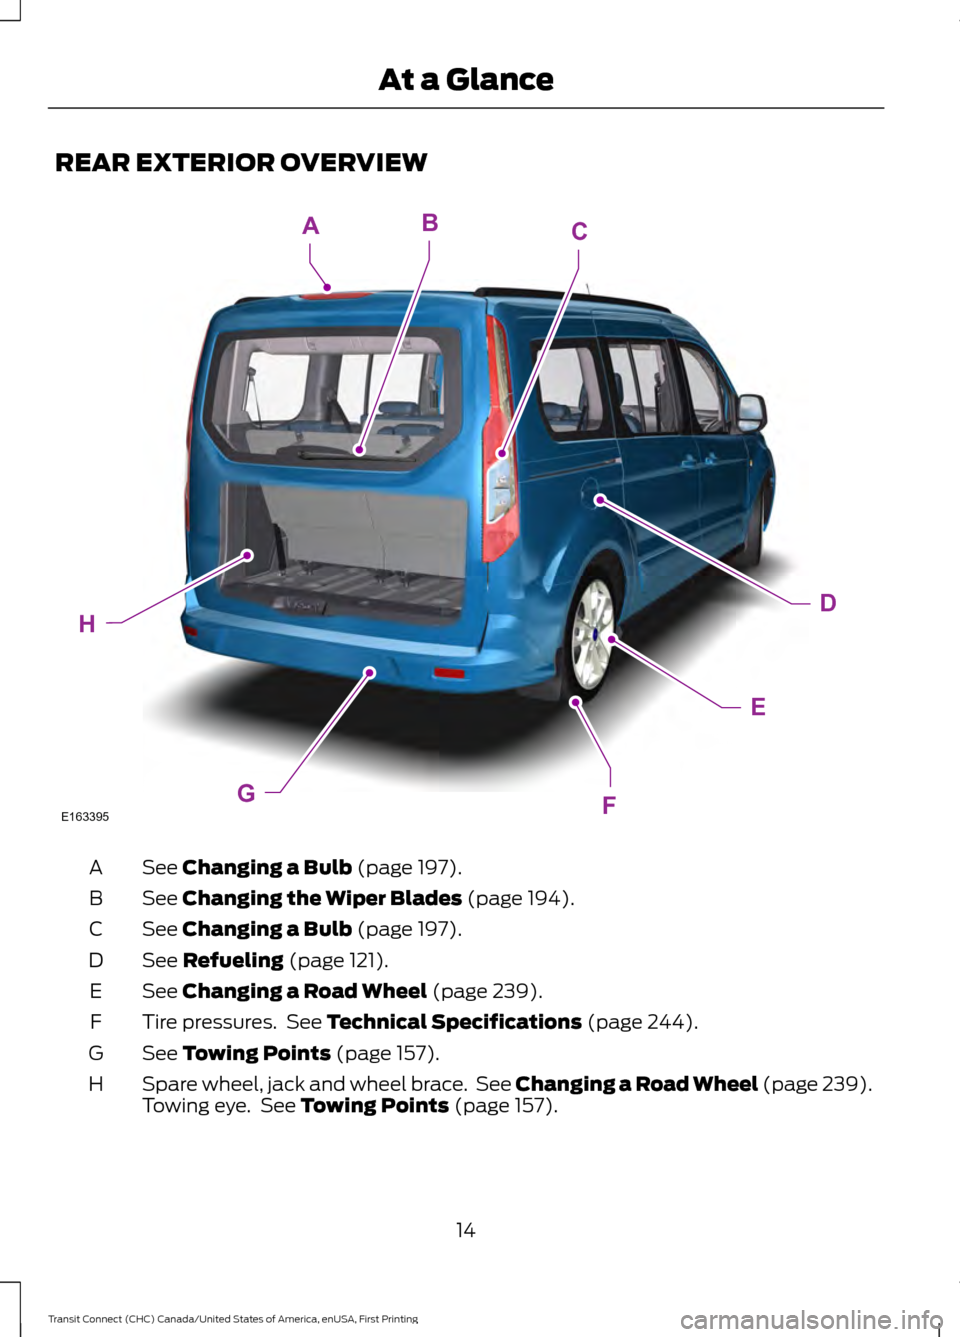 FORD TRANSIT CONNECT 2015 2.G Owners Manual REAR EXTERIOR OVERVIEW
See Changing a Bulb (page 197).
A
See 
Changing the Wiper Blades (page 194).
B
See 
Changing a Bulb (page 197).
C
See 
Refueling (page 121).
D
See 
Changing a Road Wheel (page 2